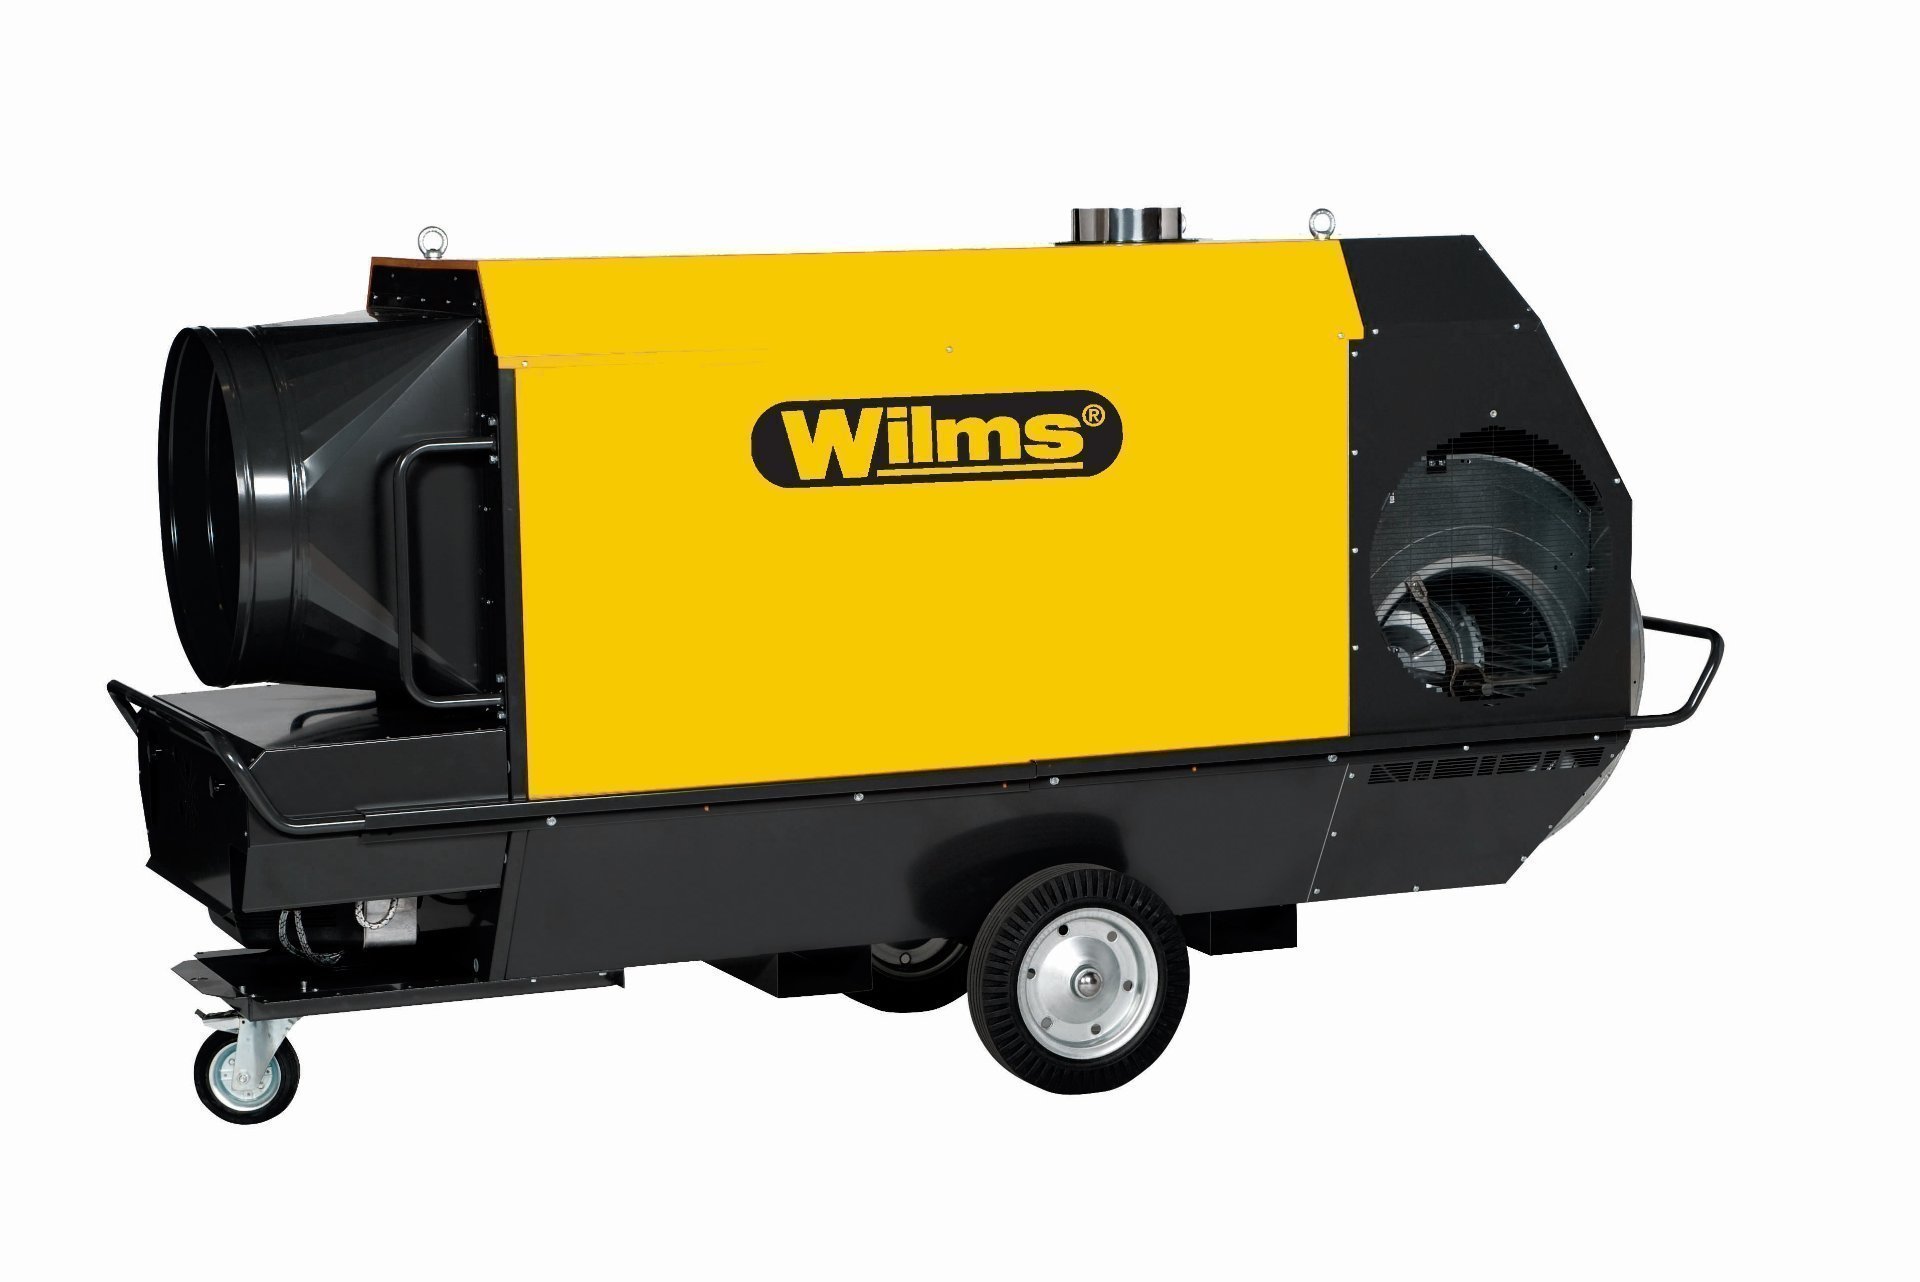 WILMS Mobile-Heizzentrale (Radial) HT 200 mit Abgasführung